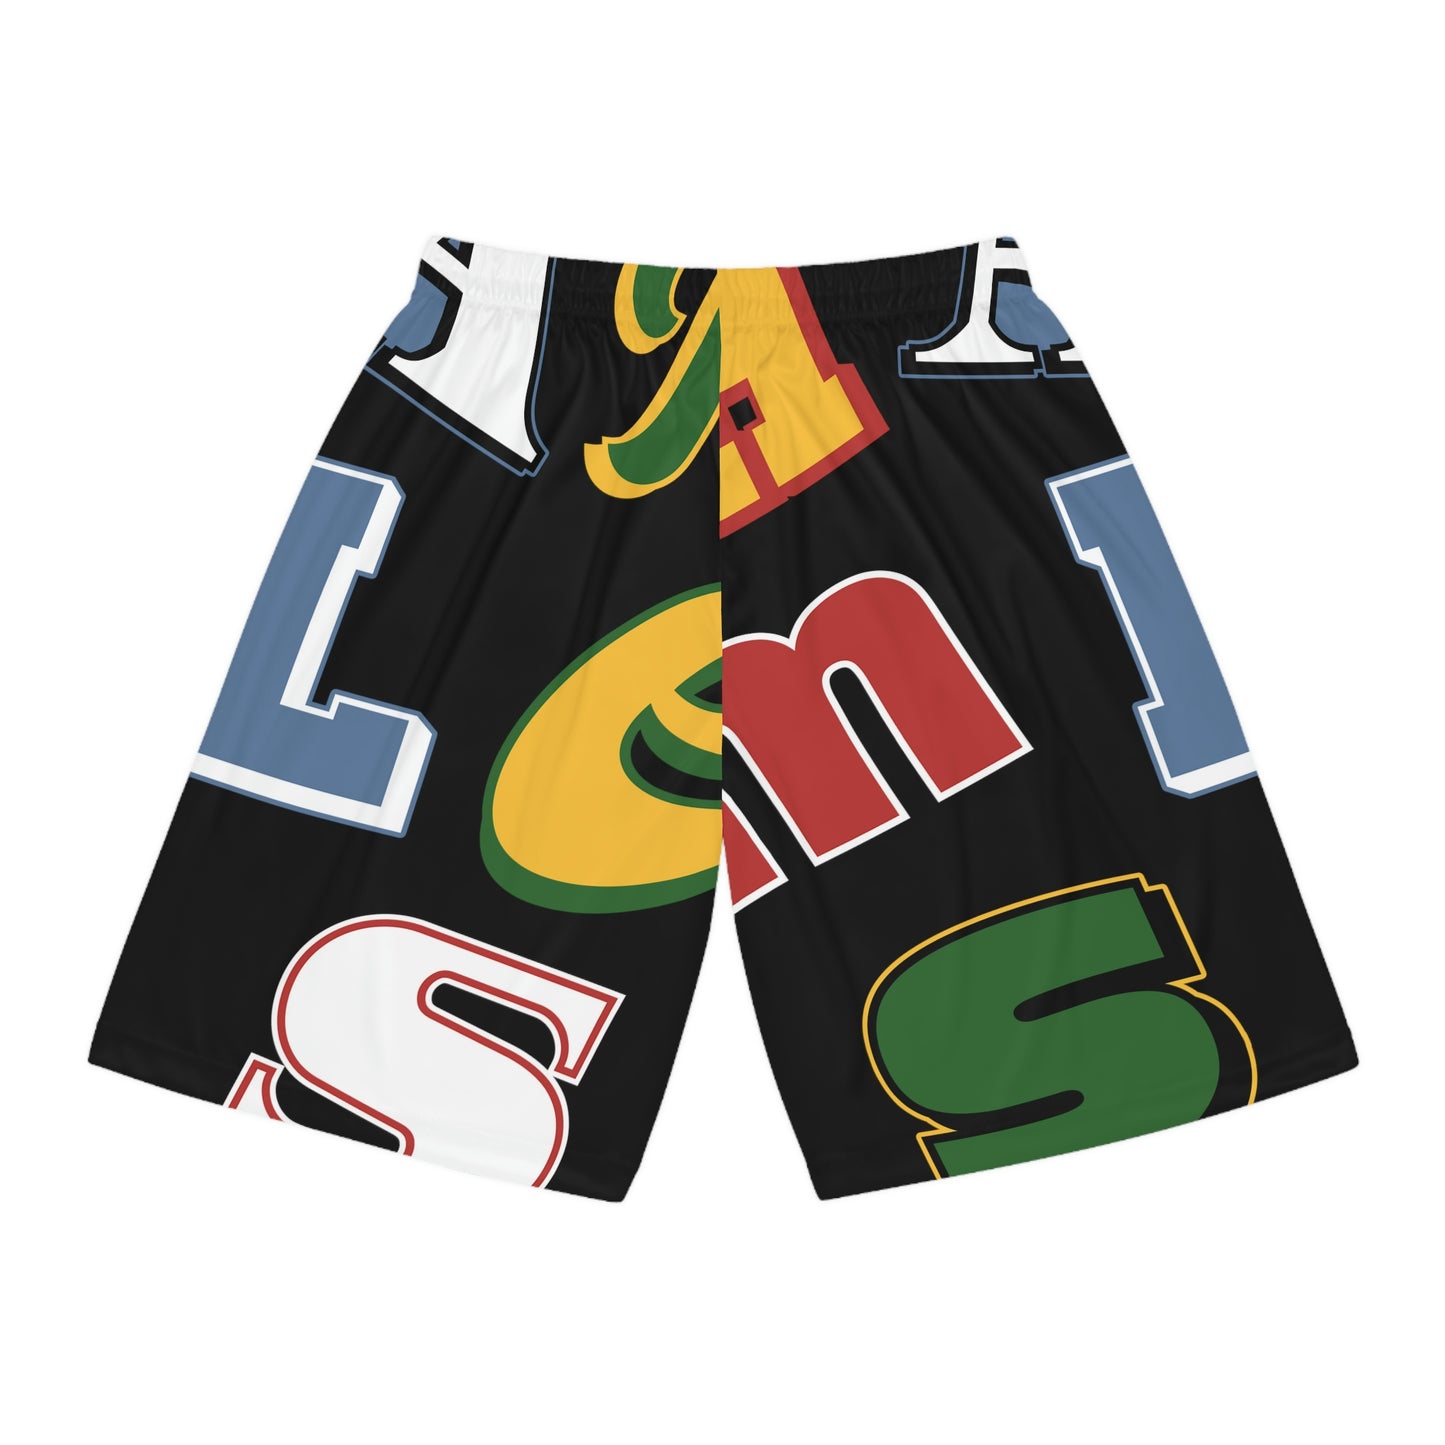 "Spelling Bee" Basketball Shorts